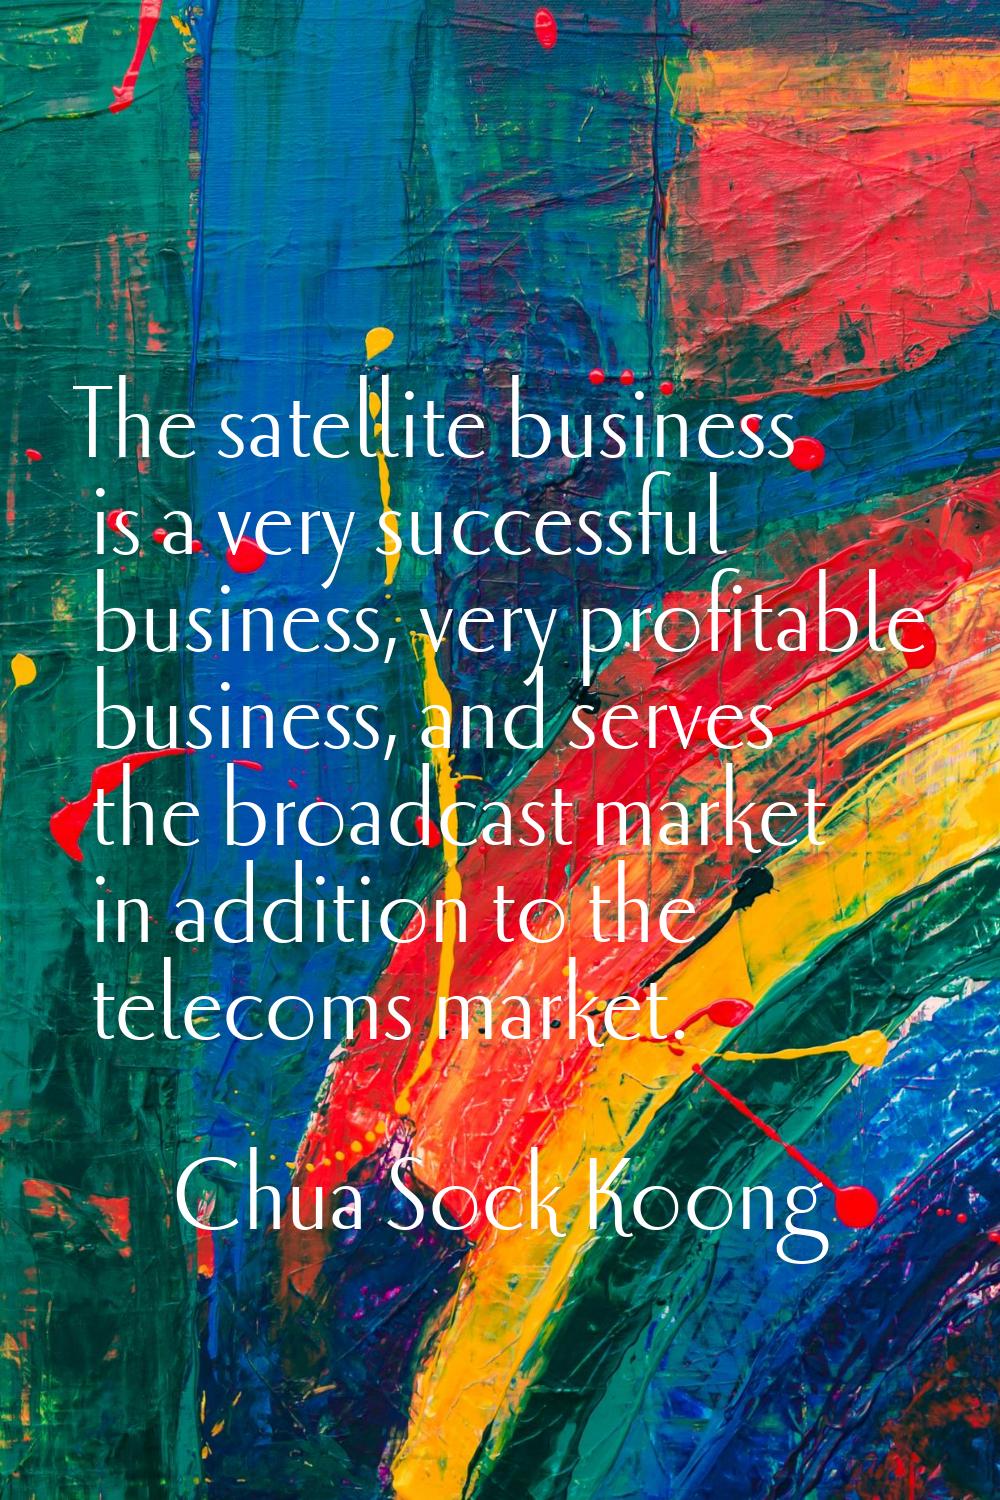 The satellite business is a very successful business, very profitable business, and serves the broa